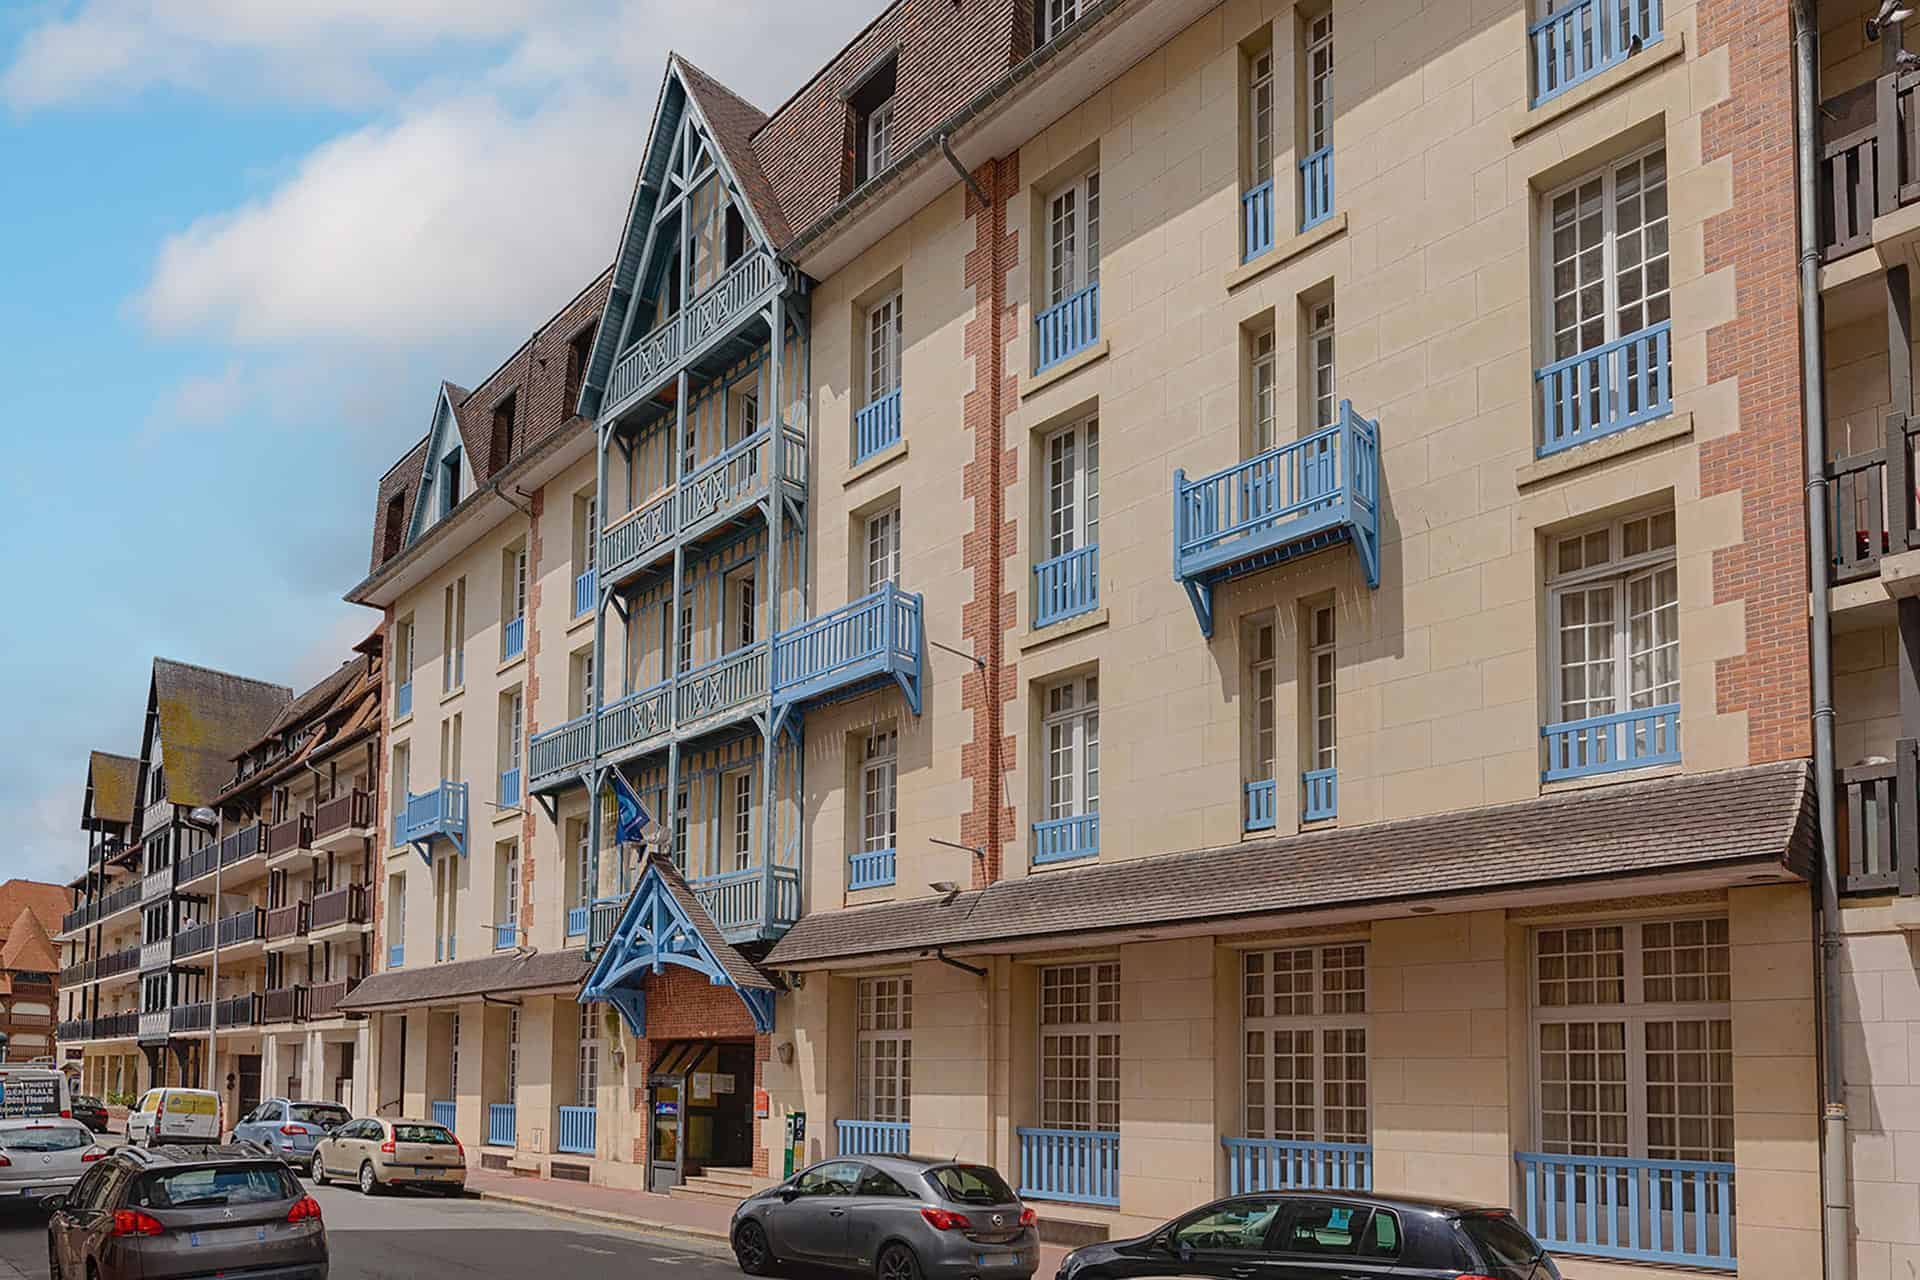 Facade of the Goélia Le Castel Normand holiday residence in Deauville